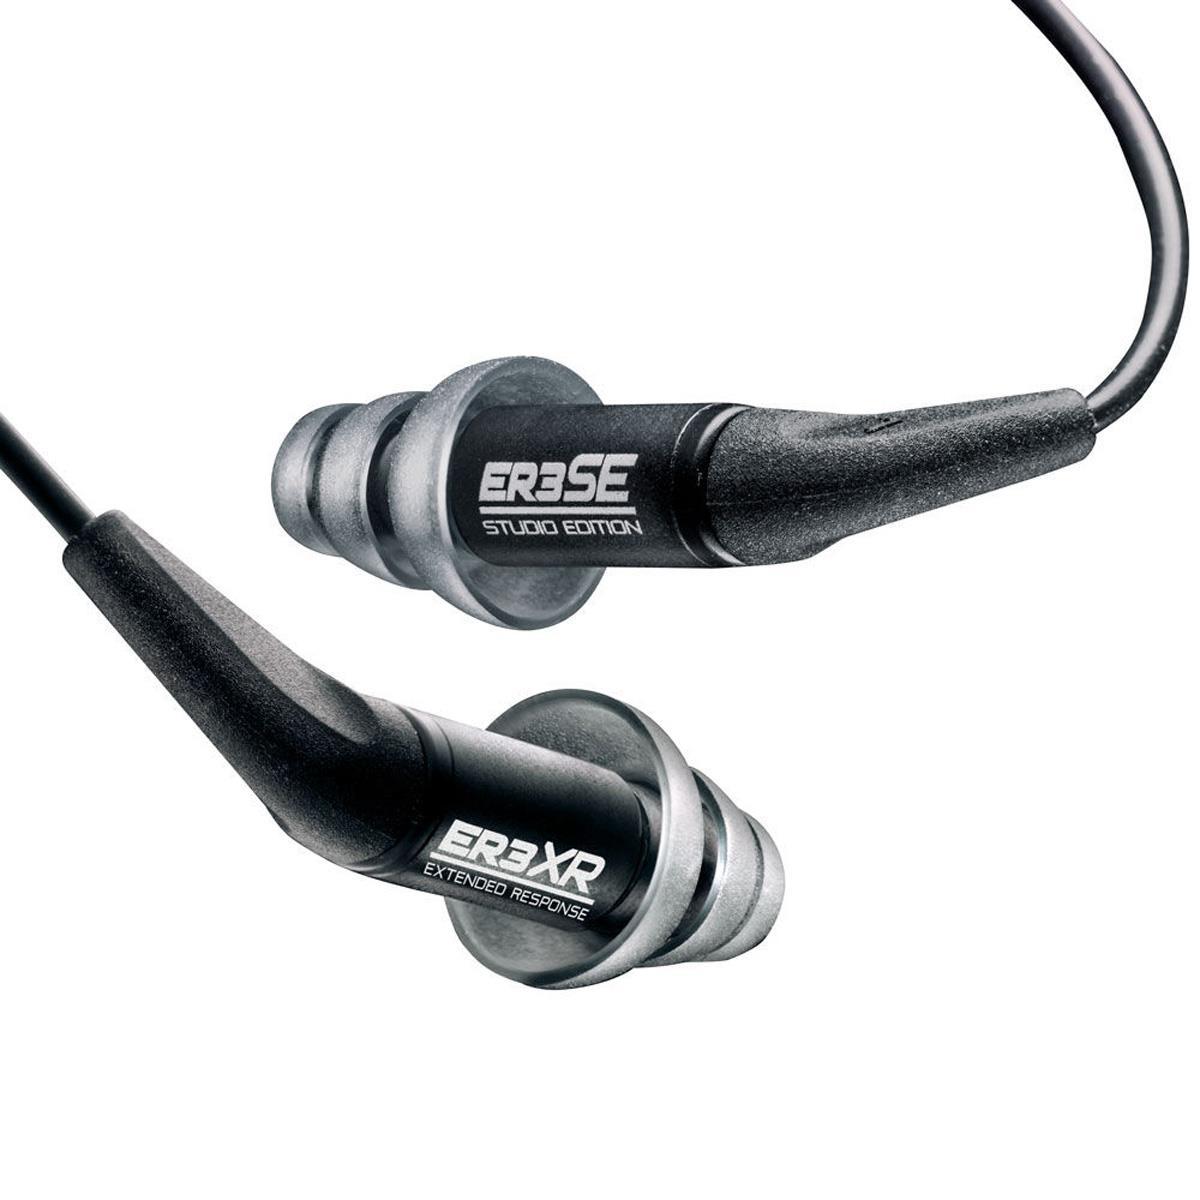 Etymotic Research ER3XR Extended Response Earphones for $59 Shipped